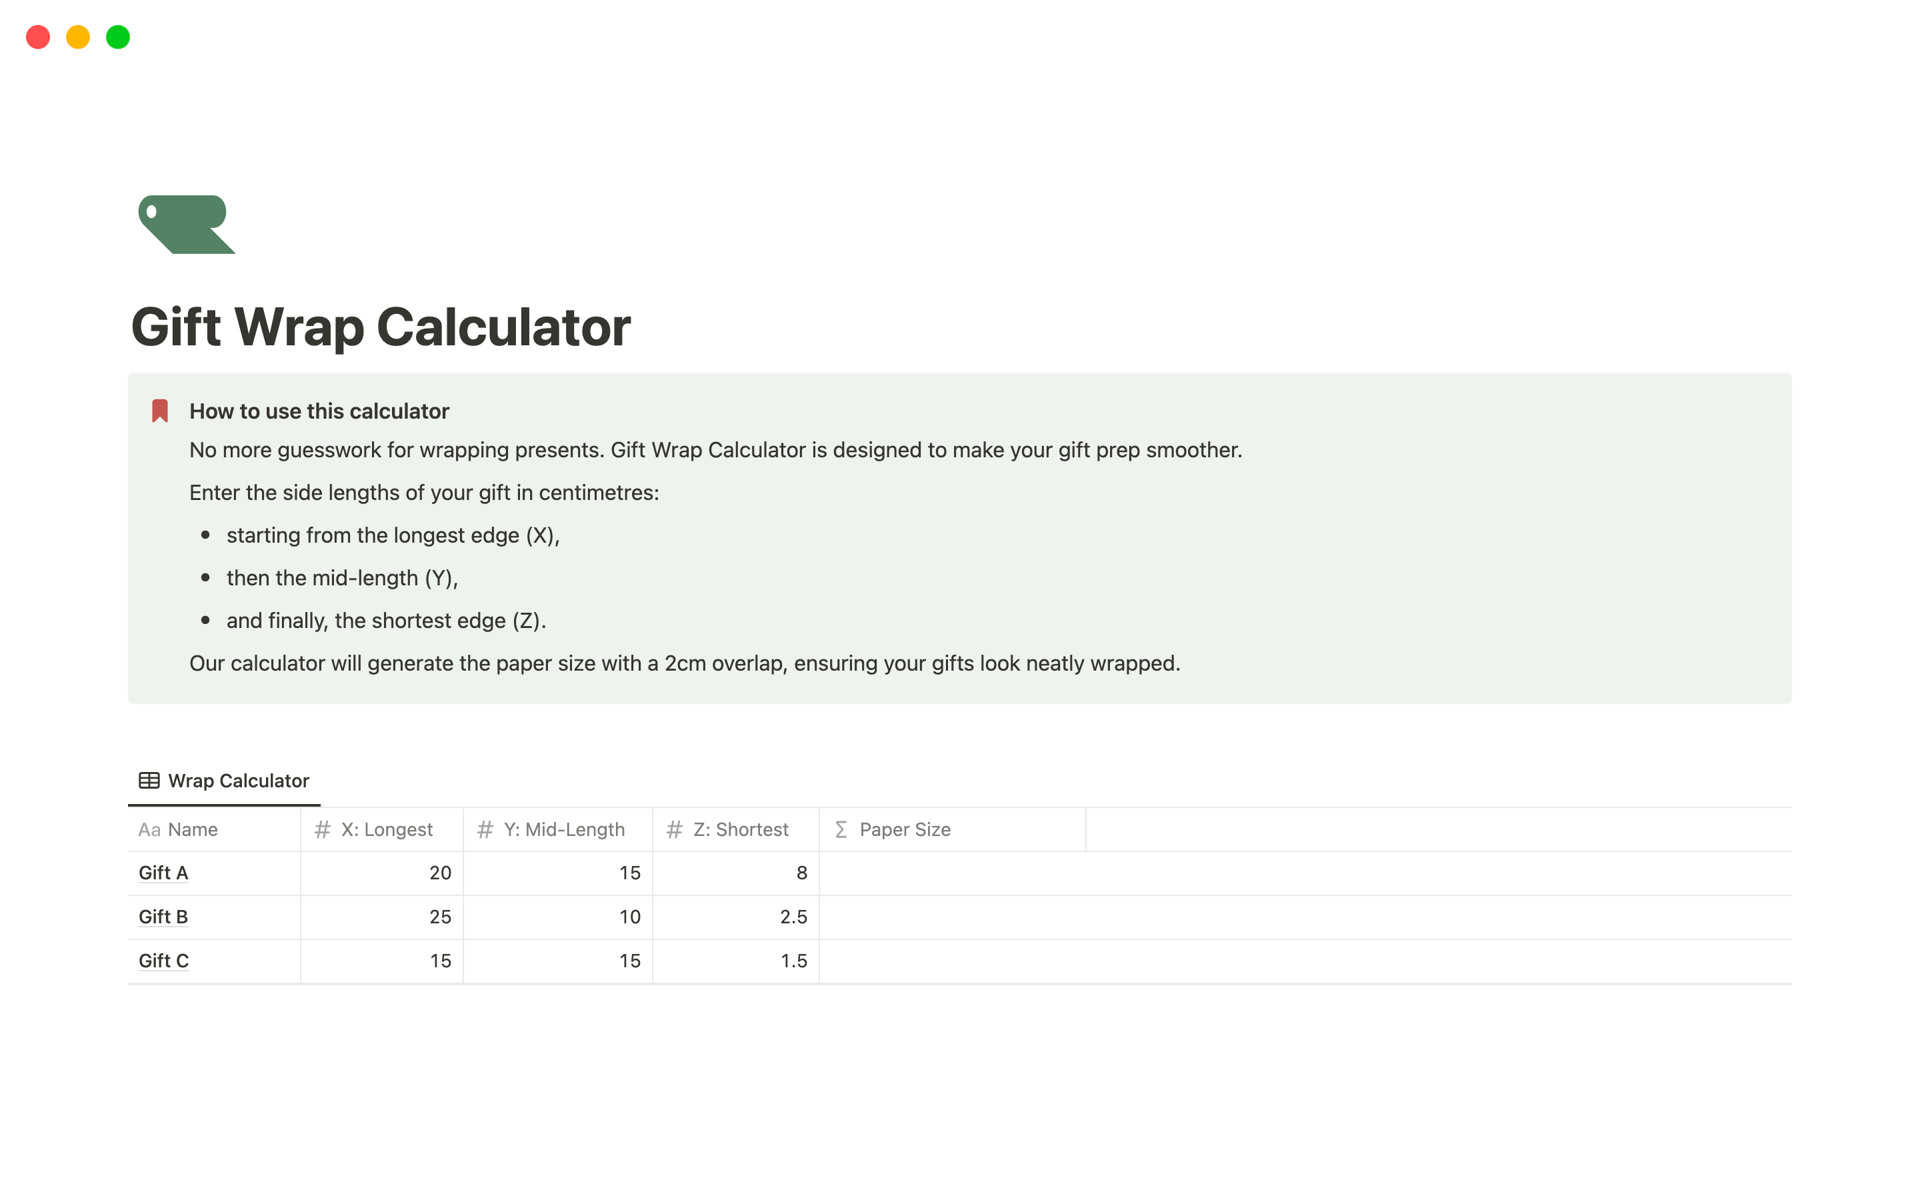 Gift Wrap Calculator calculates the ideal wrapping paper size for your gifts without waste.